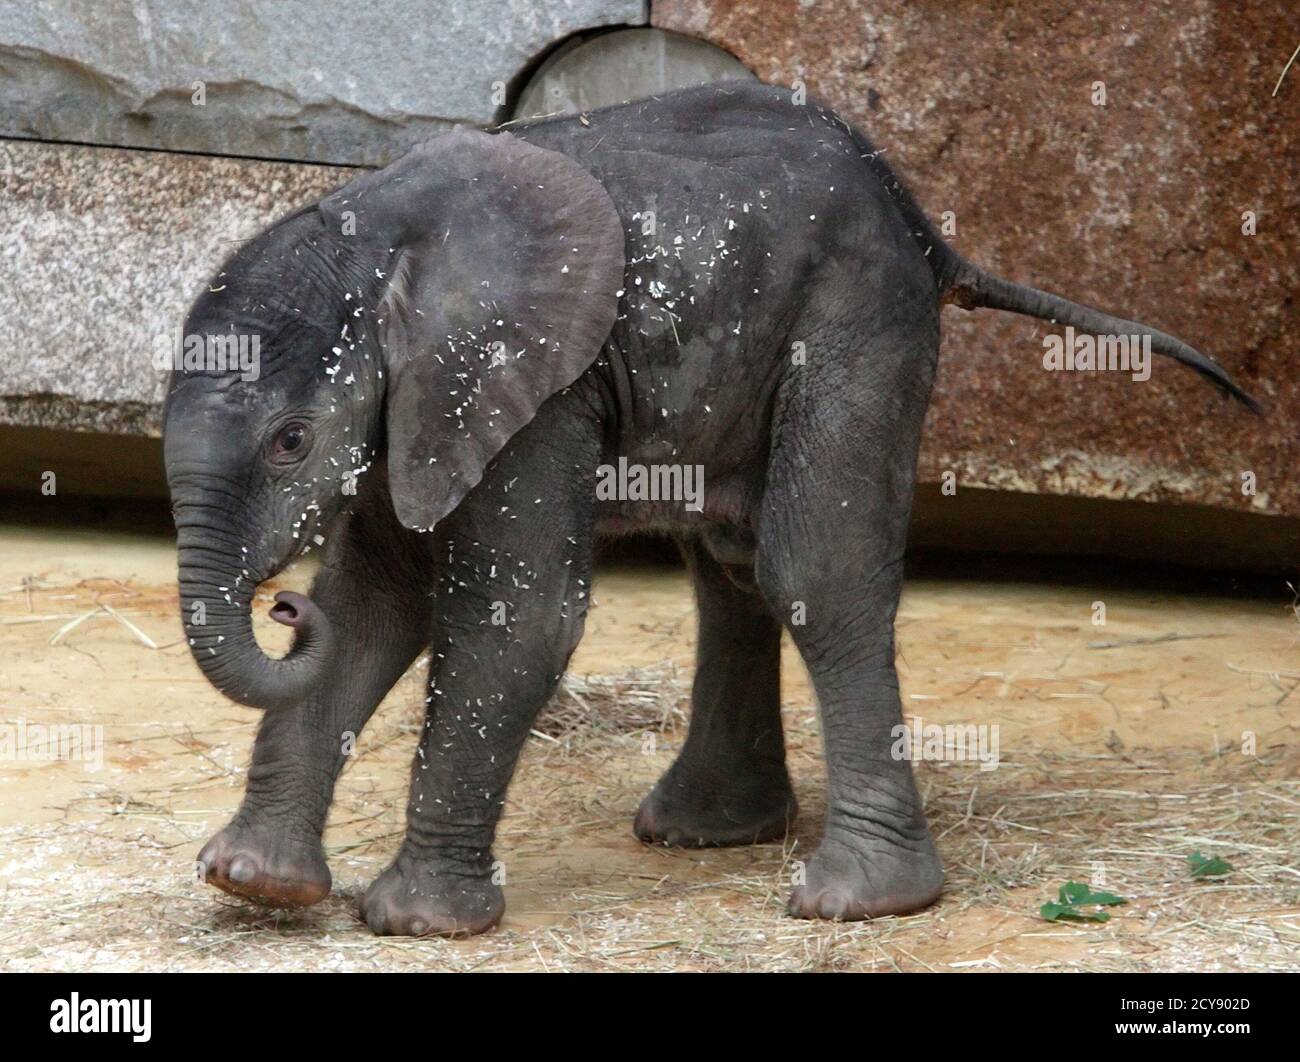 A yet unnamed African elephant calf walks in its enclosure in Schoenbrunn  zoo in Vienna August 11, 2010. The elephant calf was born in the zoo on  August 6 with a height